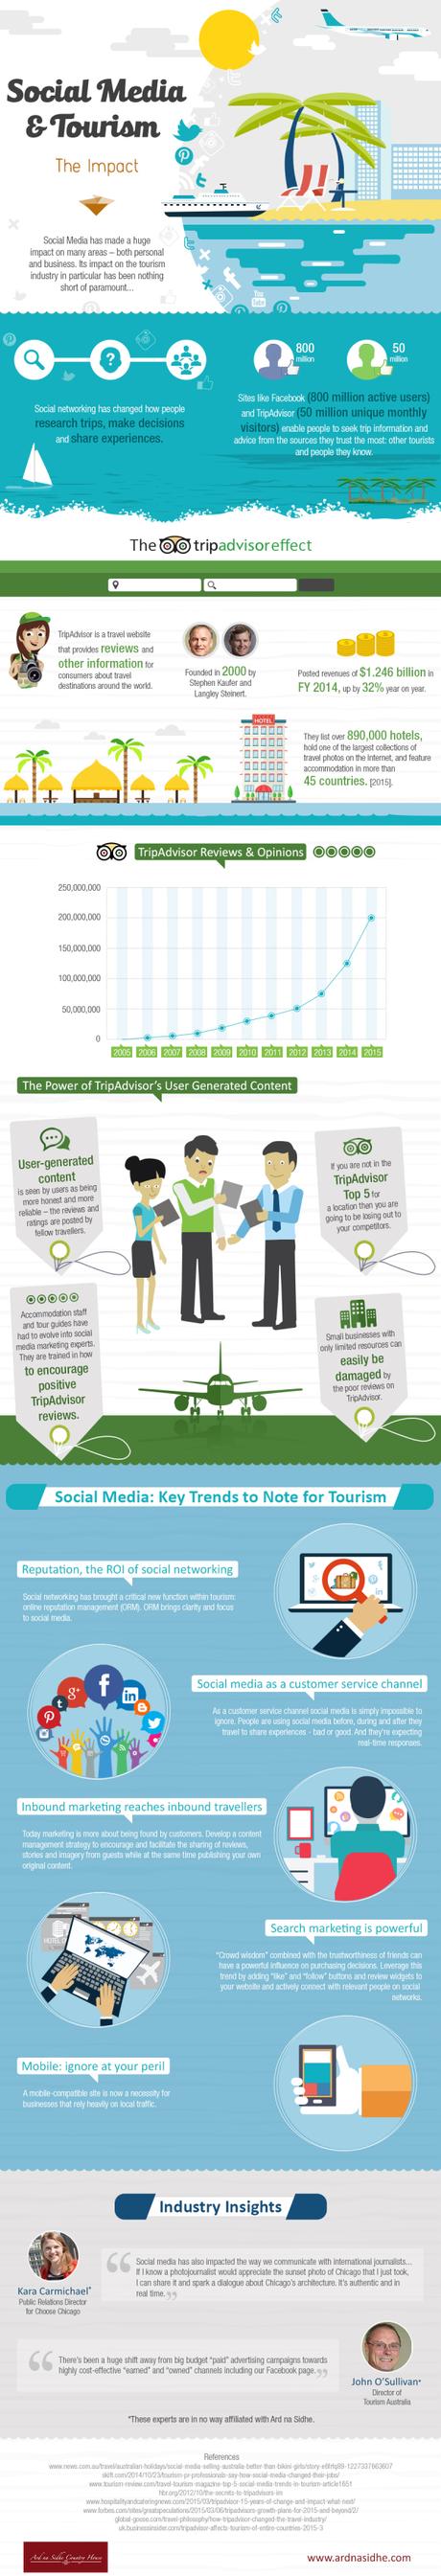 How Social Media Impacts the Global Tourism Industry